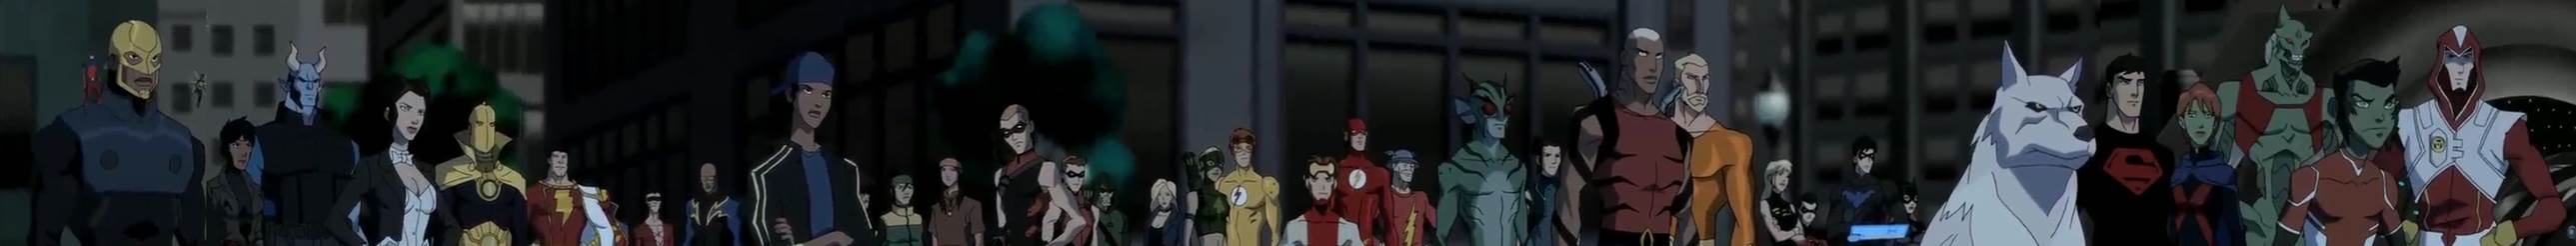 Young Justice Invasion Overall Episode 46 Season 2 Episode 20 Endgame Heroes United 1